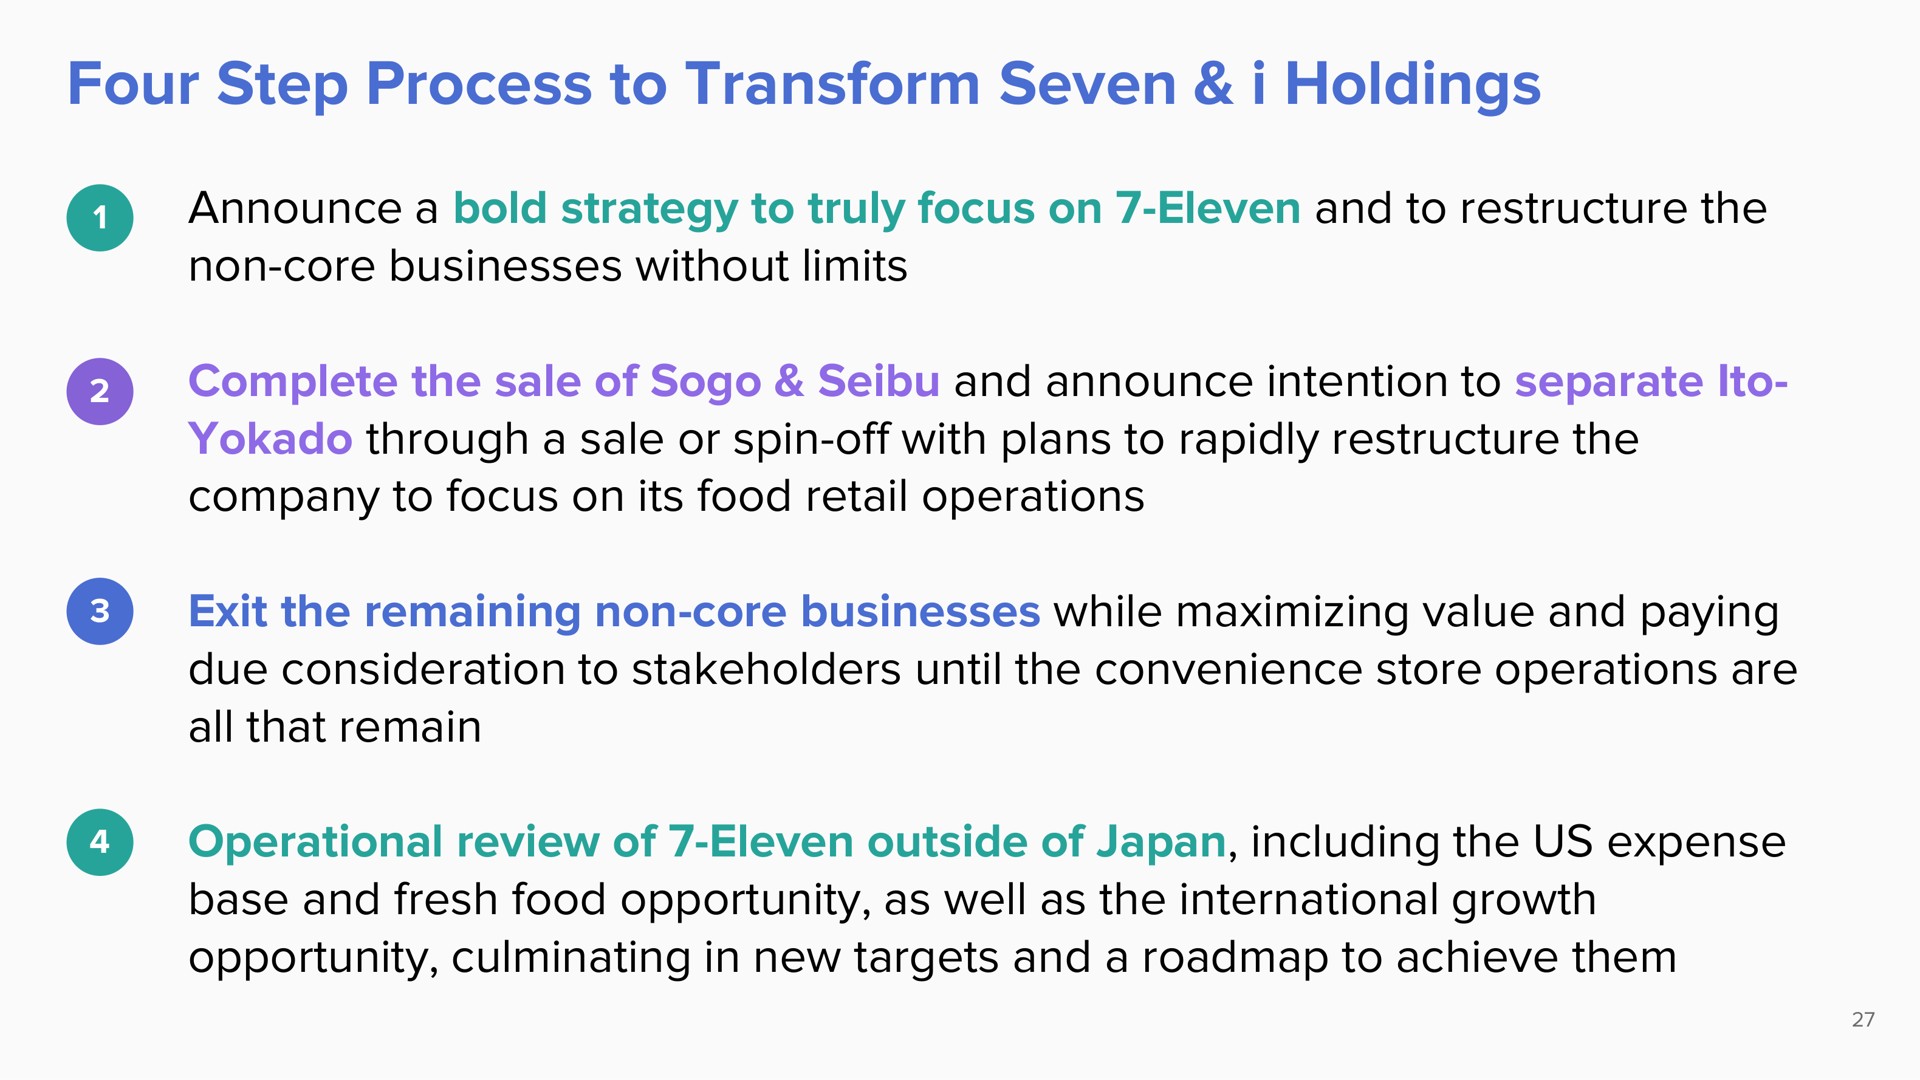 four step process to transform seven i holdings announce a bold strategy to truly focus on eleven and to the non core businesses without limits complete the sale of and announce intention to separate through a sale or spin off with plans to rapidly the company to focus on its food retail operations exit the remaining non core businesses while maximizing value and paying due consideration to stakeholders until the convenience store operations are all that remain operational review of eleven outside of japan including the us expense base and fresh food opportunity as well as the international growth opportunity culminating in new targets and a to achieve them | ValueAct Capital